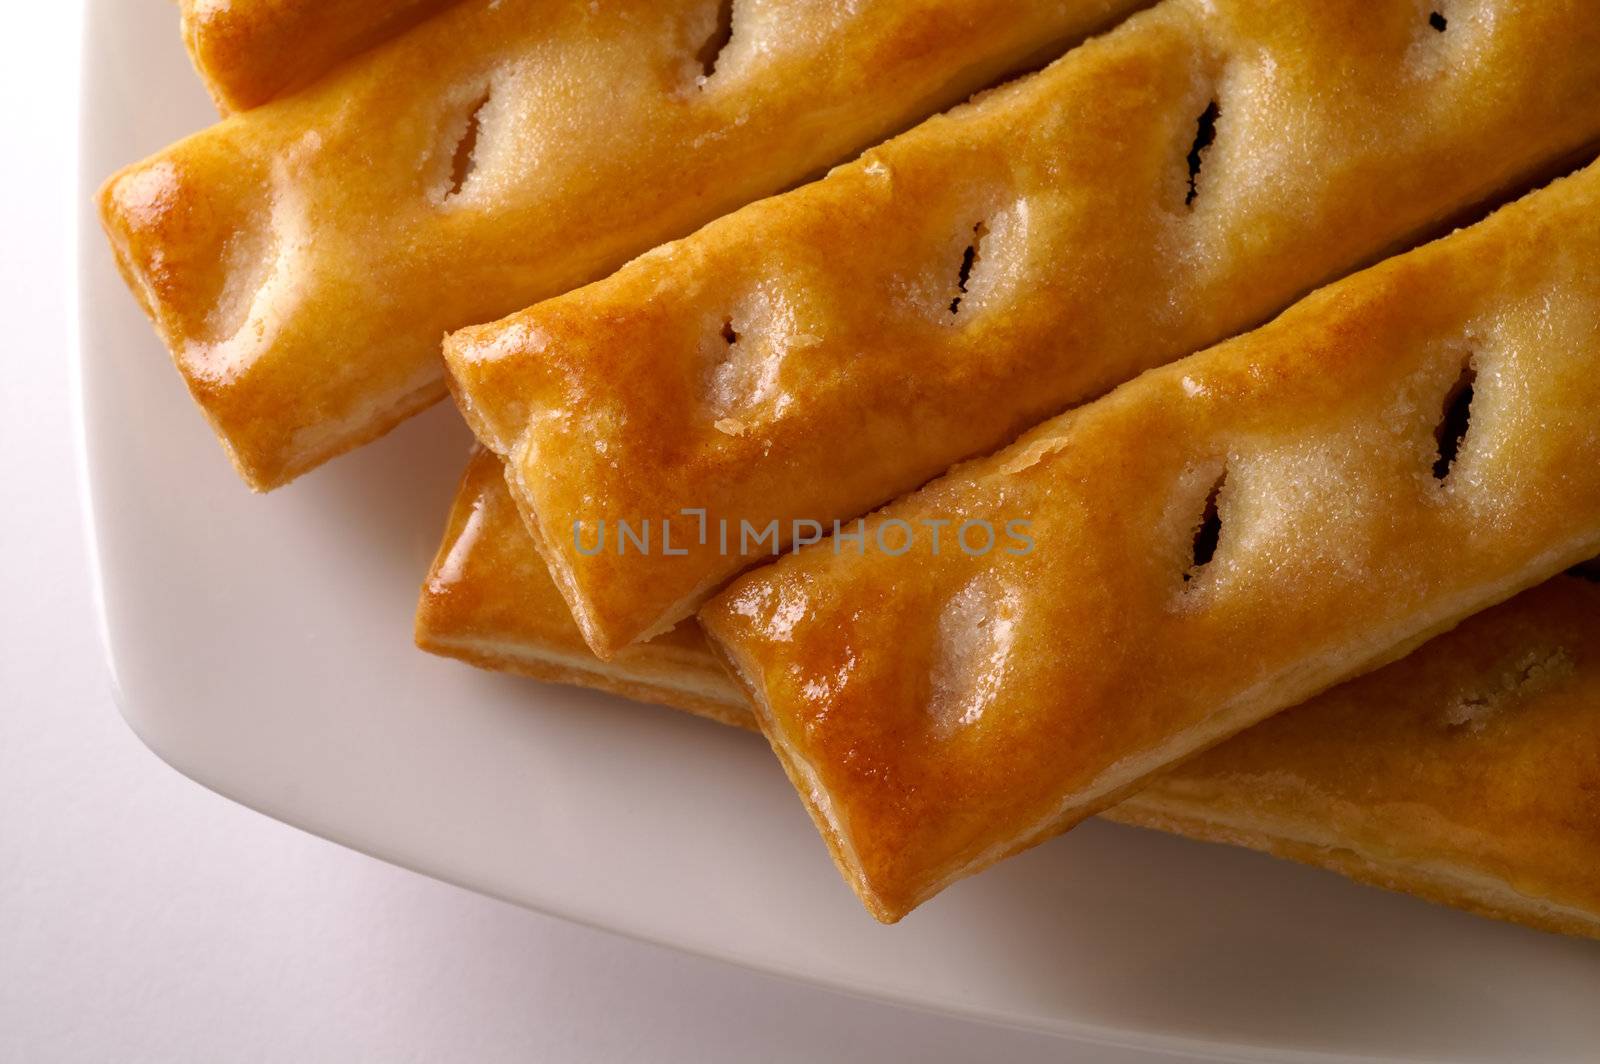 Glazed puff pastry in a dish  by Laborer